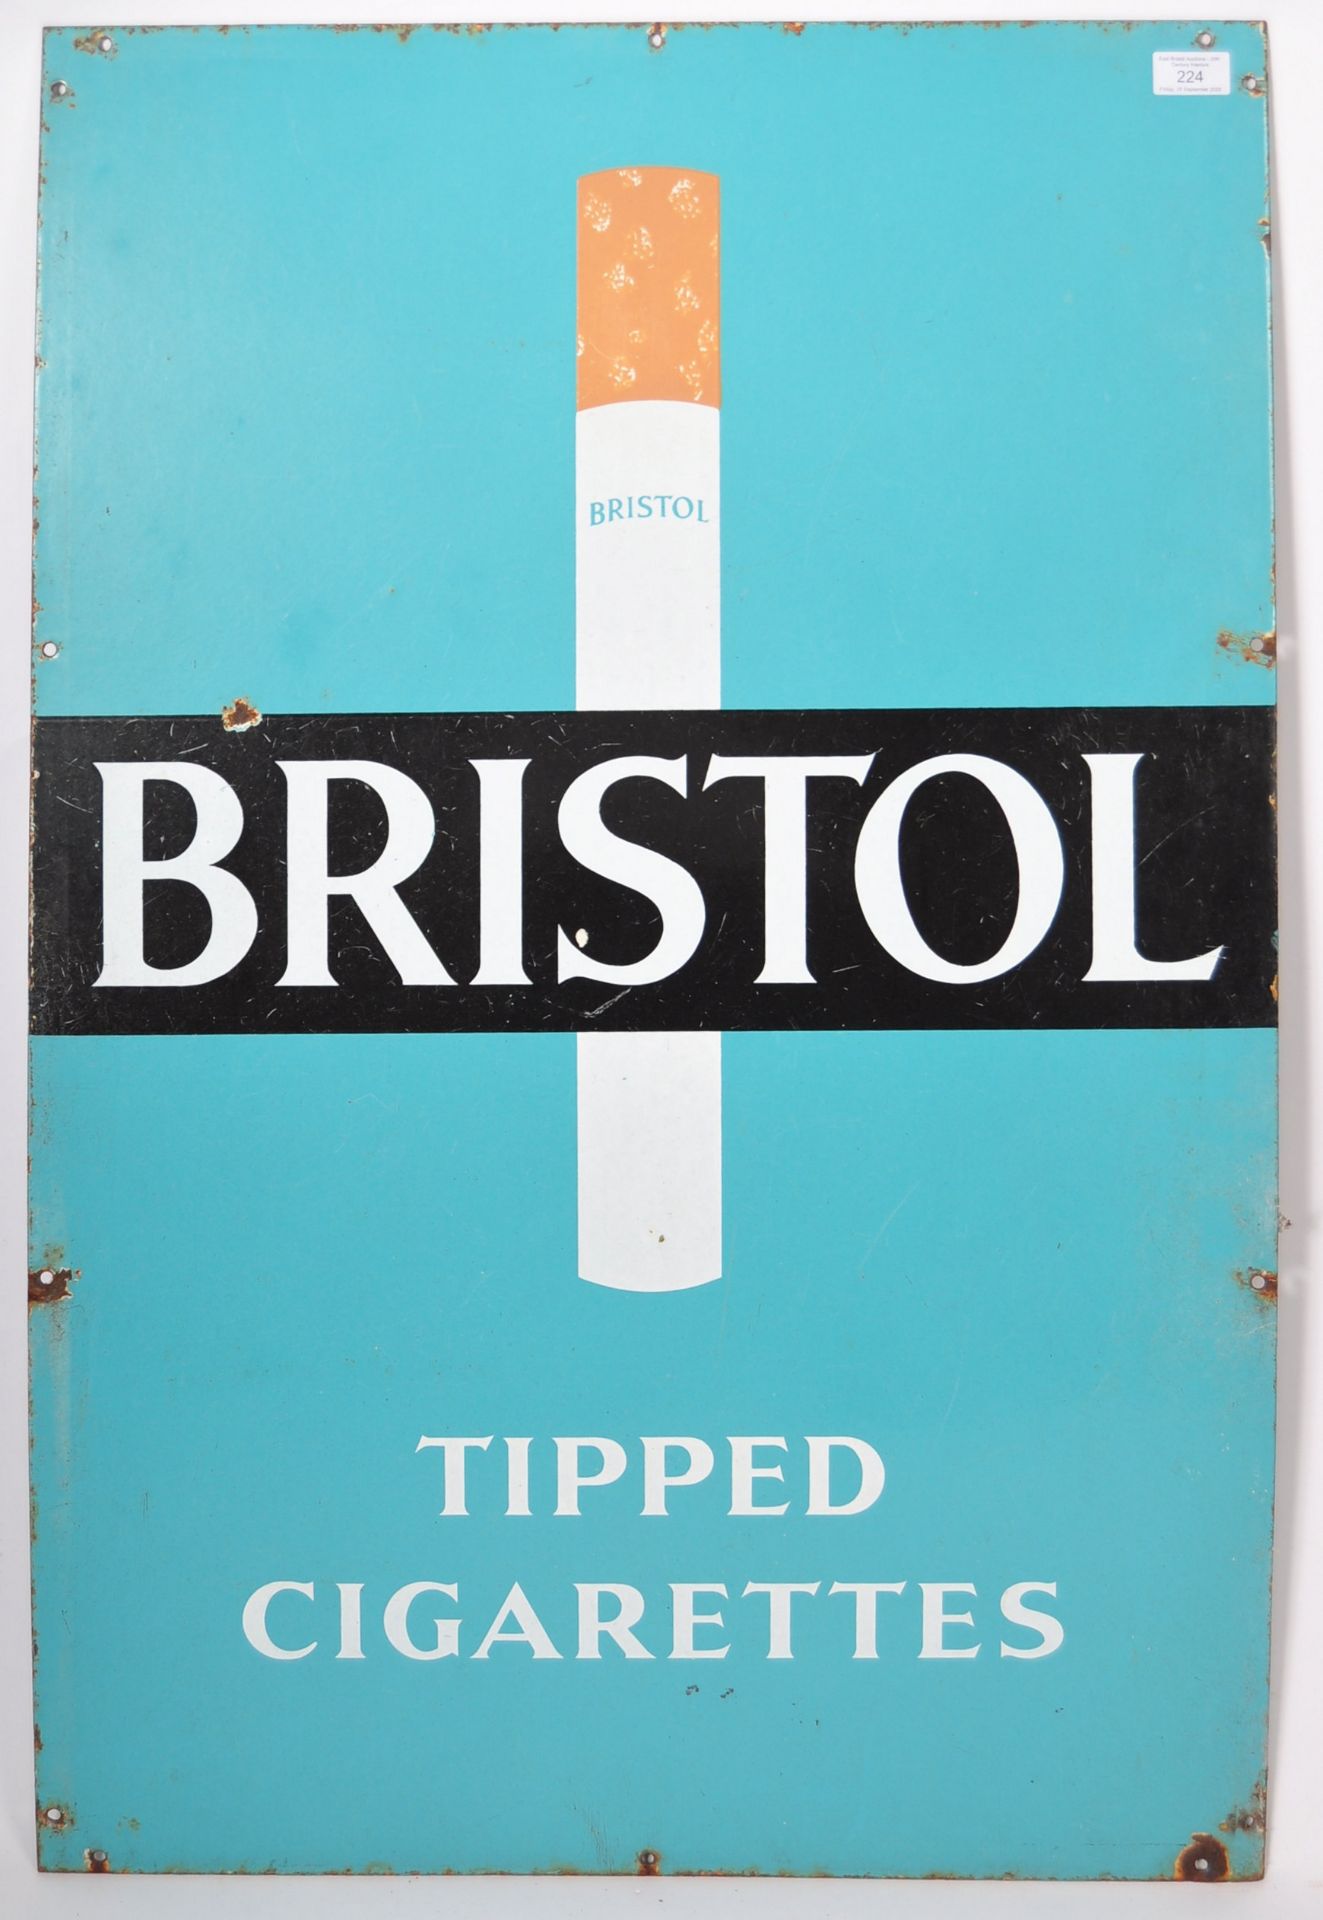 BRISTOL TIPPED CIGARETTES ENAMELED ADVERTISING POINT OF SALE SIGN